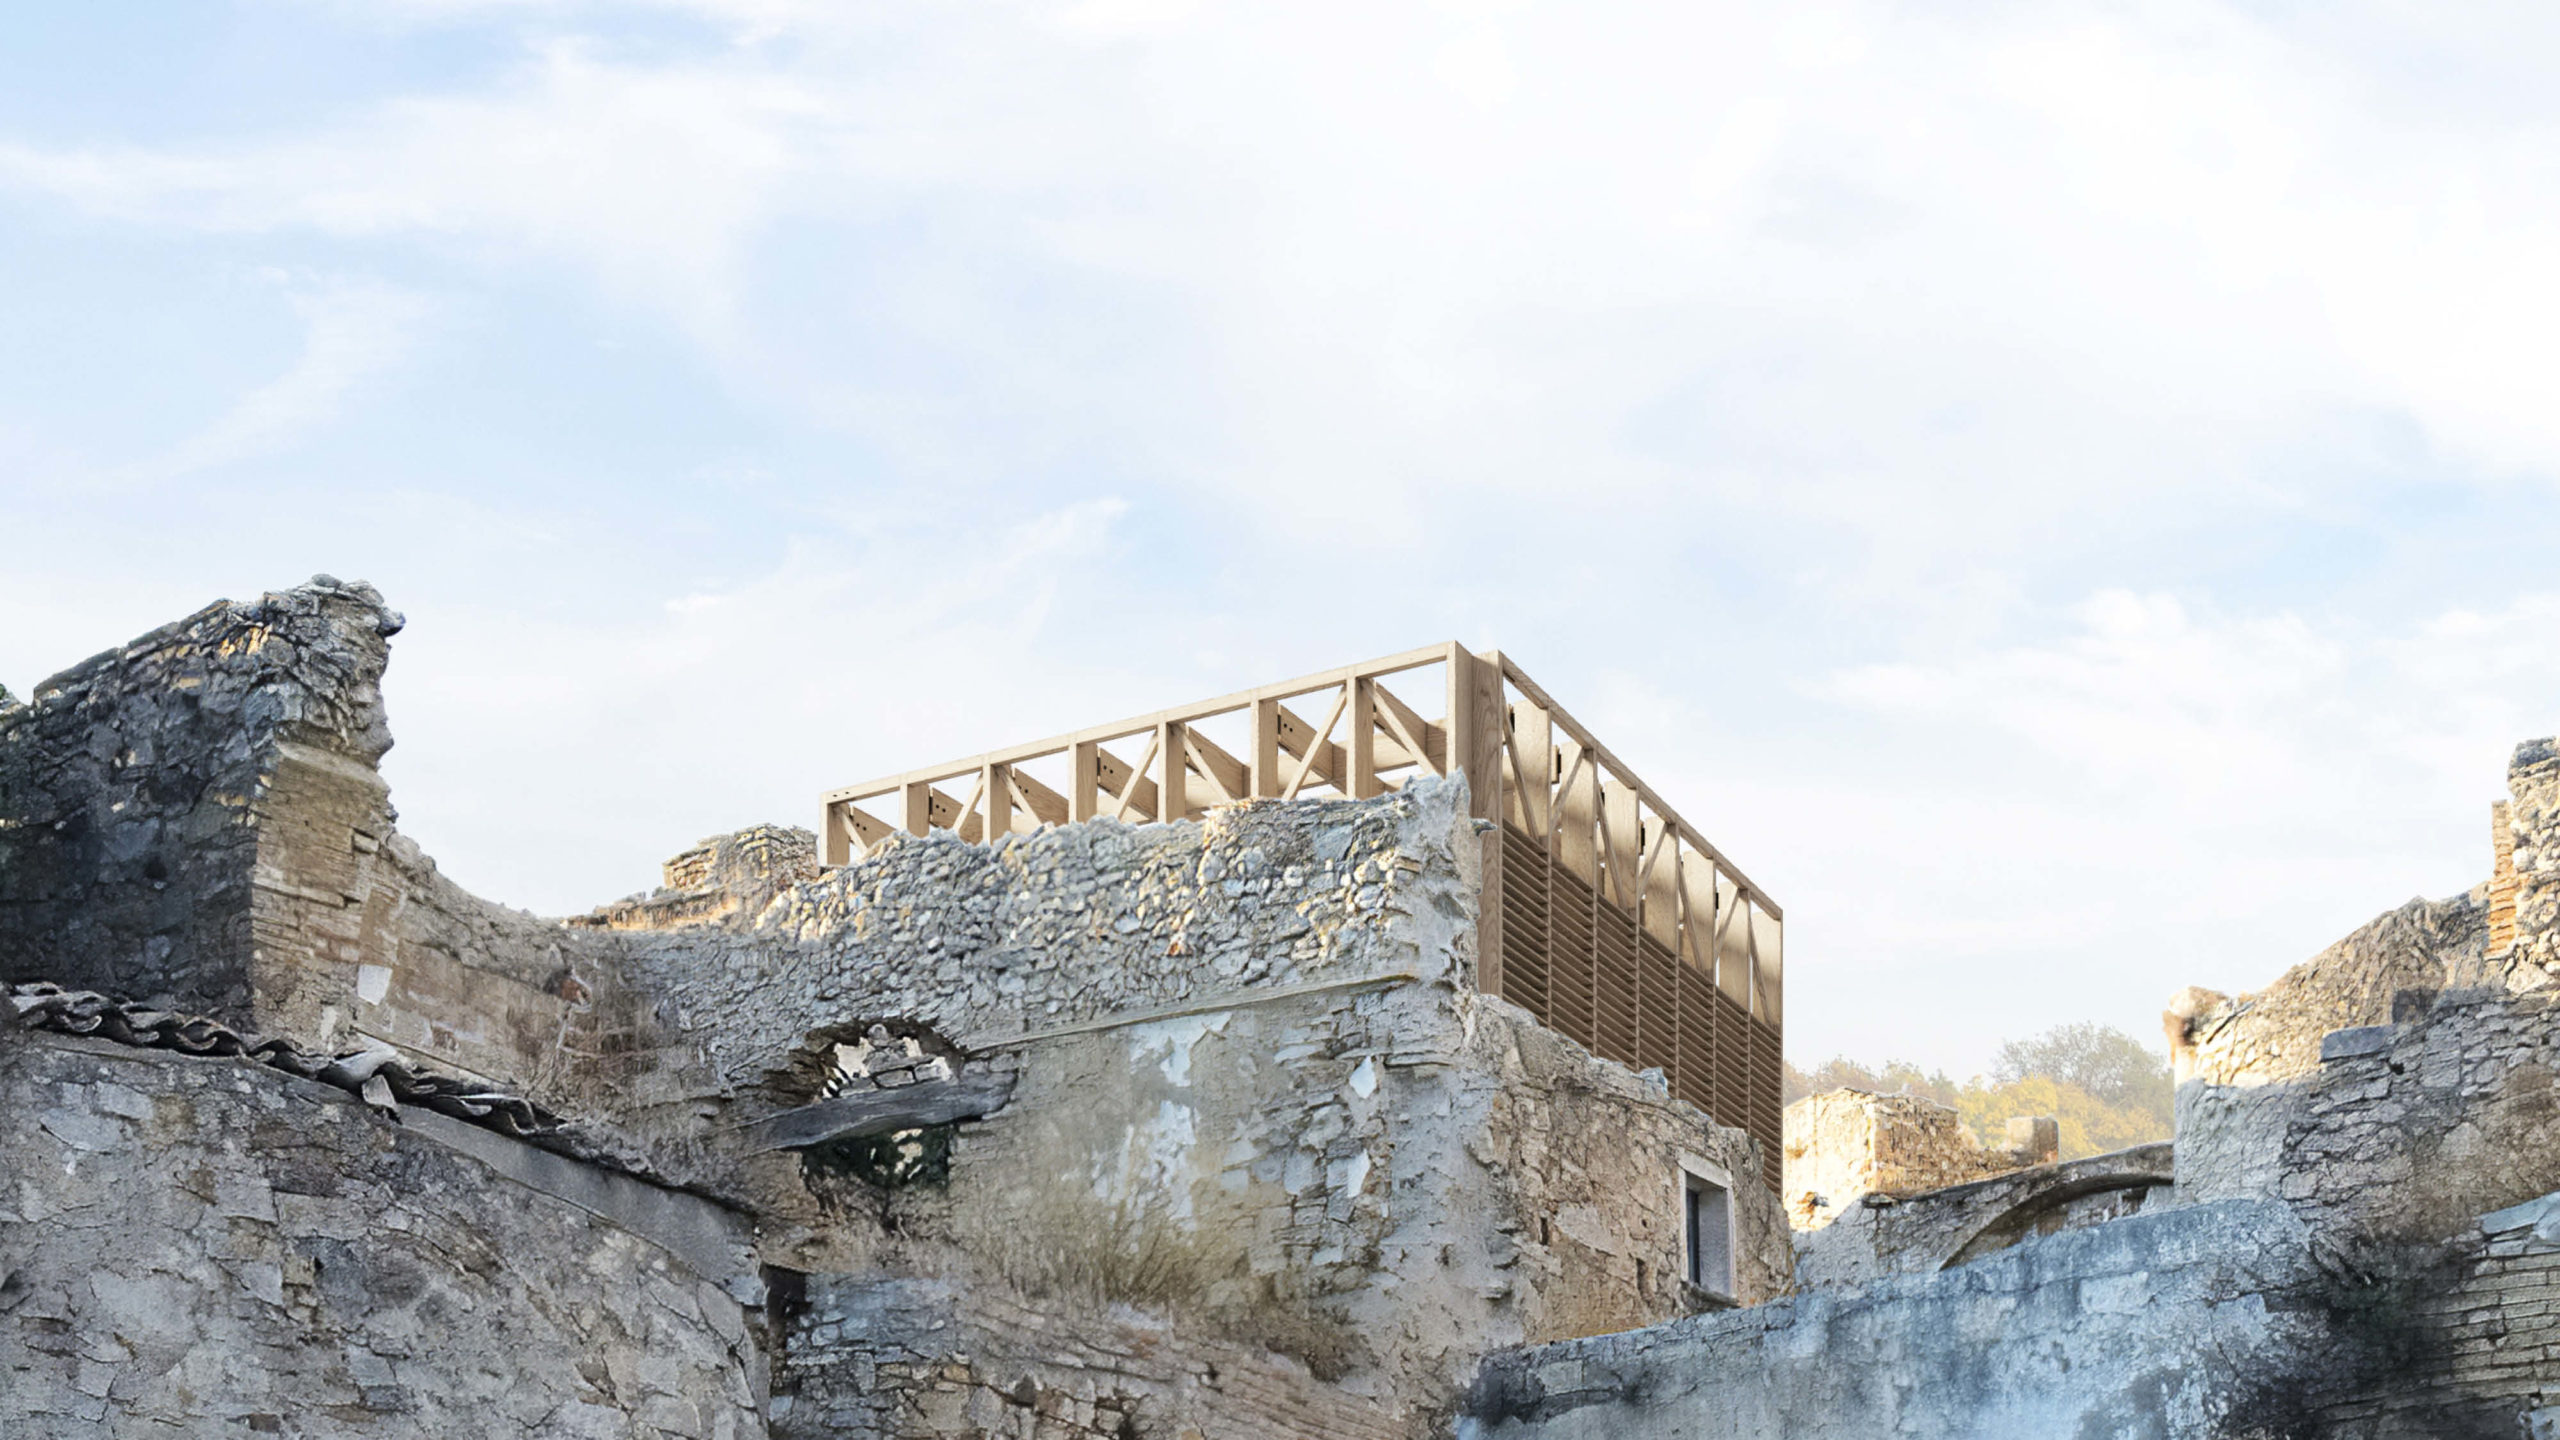 Unbuilt : TRACES - GHOST TOWN REFUGE, at Craco, Italy, by Claudio C. Araya, Yahya Abdullah 1